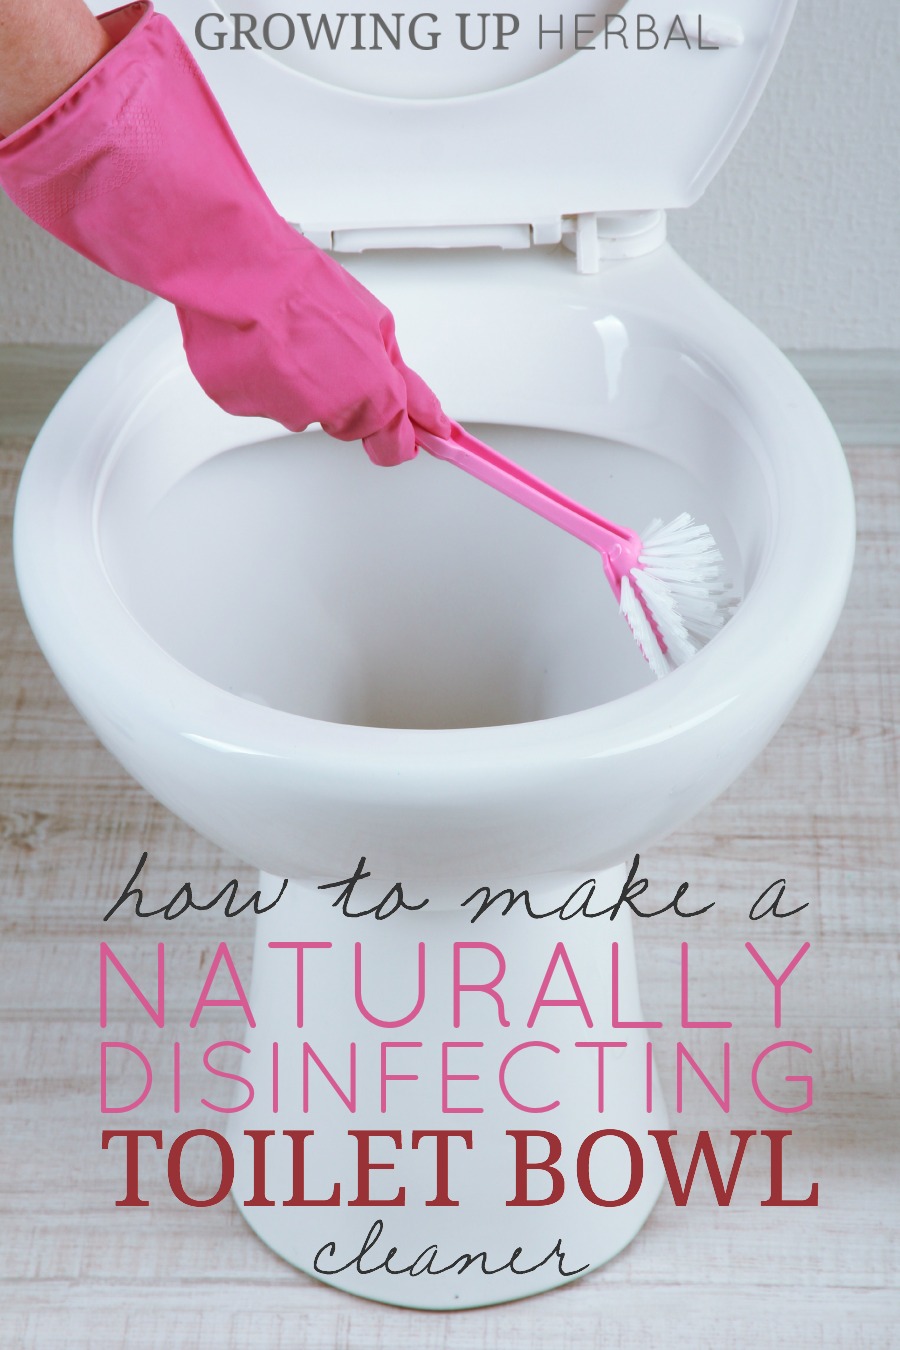 How To Make A Naturally Disinfecting Toilet Bowl Cleaner